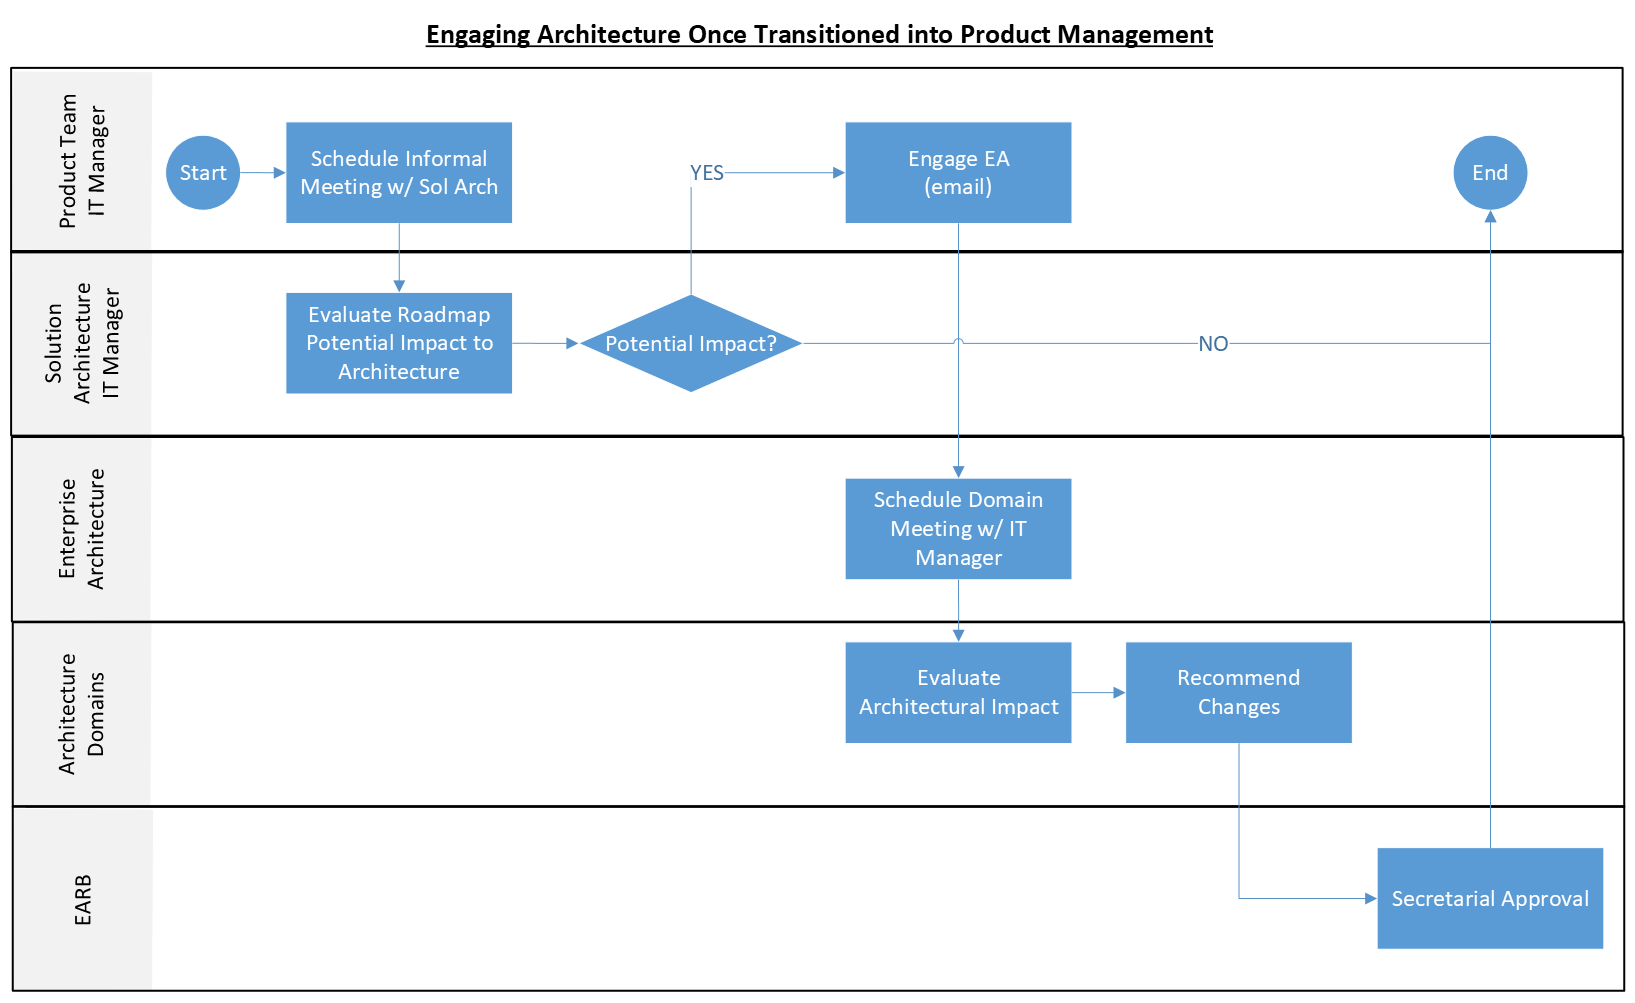 This image depicts the business process modeling notation (BPMN) for engaging the Architecture domain when making produce improvements. The BPMN includes 5 horizontal swimlane labeled Product Team IT Manager, Solution Architecture IT Manager, Enterprise Architecture, Architecture Domains, and EARB. The process flow is as follows: Start in Product Team IT Manager swimlane, goes to Schedule Informal Meeting with Solution Architecture, goes down towards Solution Architecture IT Manager swimlane to Evaluate Roadmap Potential Impact to Architecture, goes to a decision point called Potential Impact? If no, goes to End (in the Product Team IT Manager swimlane). If yes, goes up to Product Team IT Manager swimlane for Engage EA (email), then goes down to Enterprise Architecture swimlane for Schedule Domain Meeting with IT Manager, goes to Architecture Domains swimlane for Evaluate Architectural Impact, then continues right to Recommend Changes, then goes down to EARB swimlane for Secretarial Approval. The BPMN finishes by going back up to the PRoduct Team IT Manager with END.